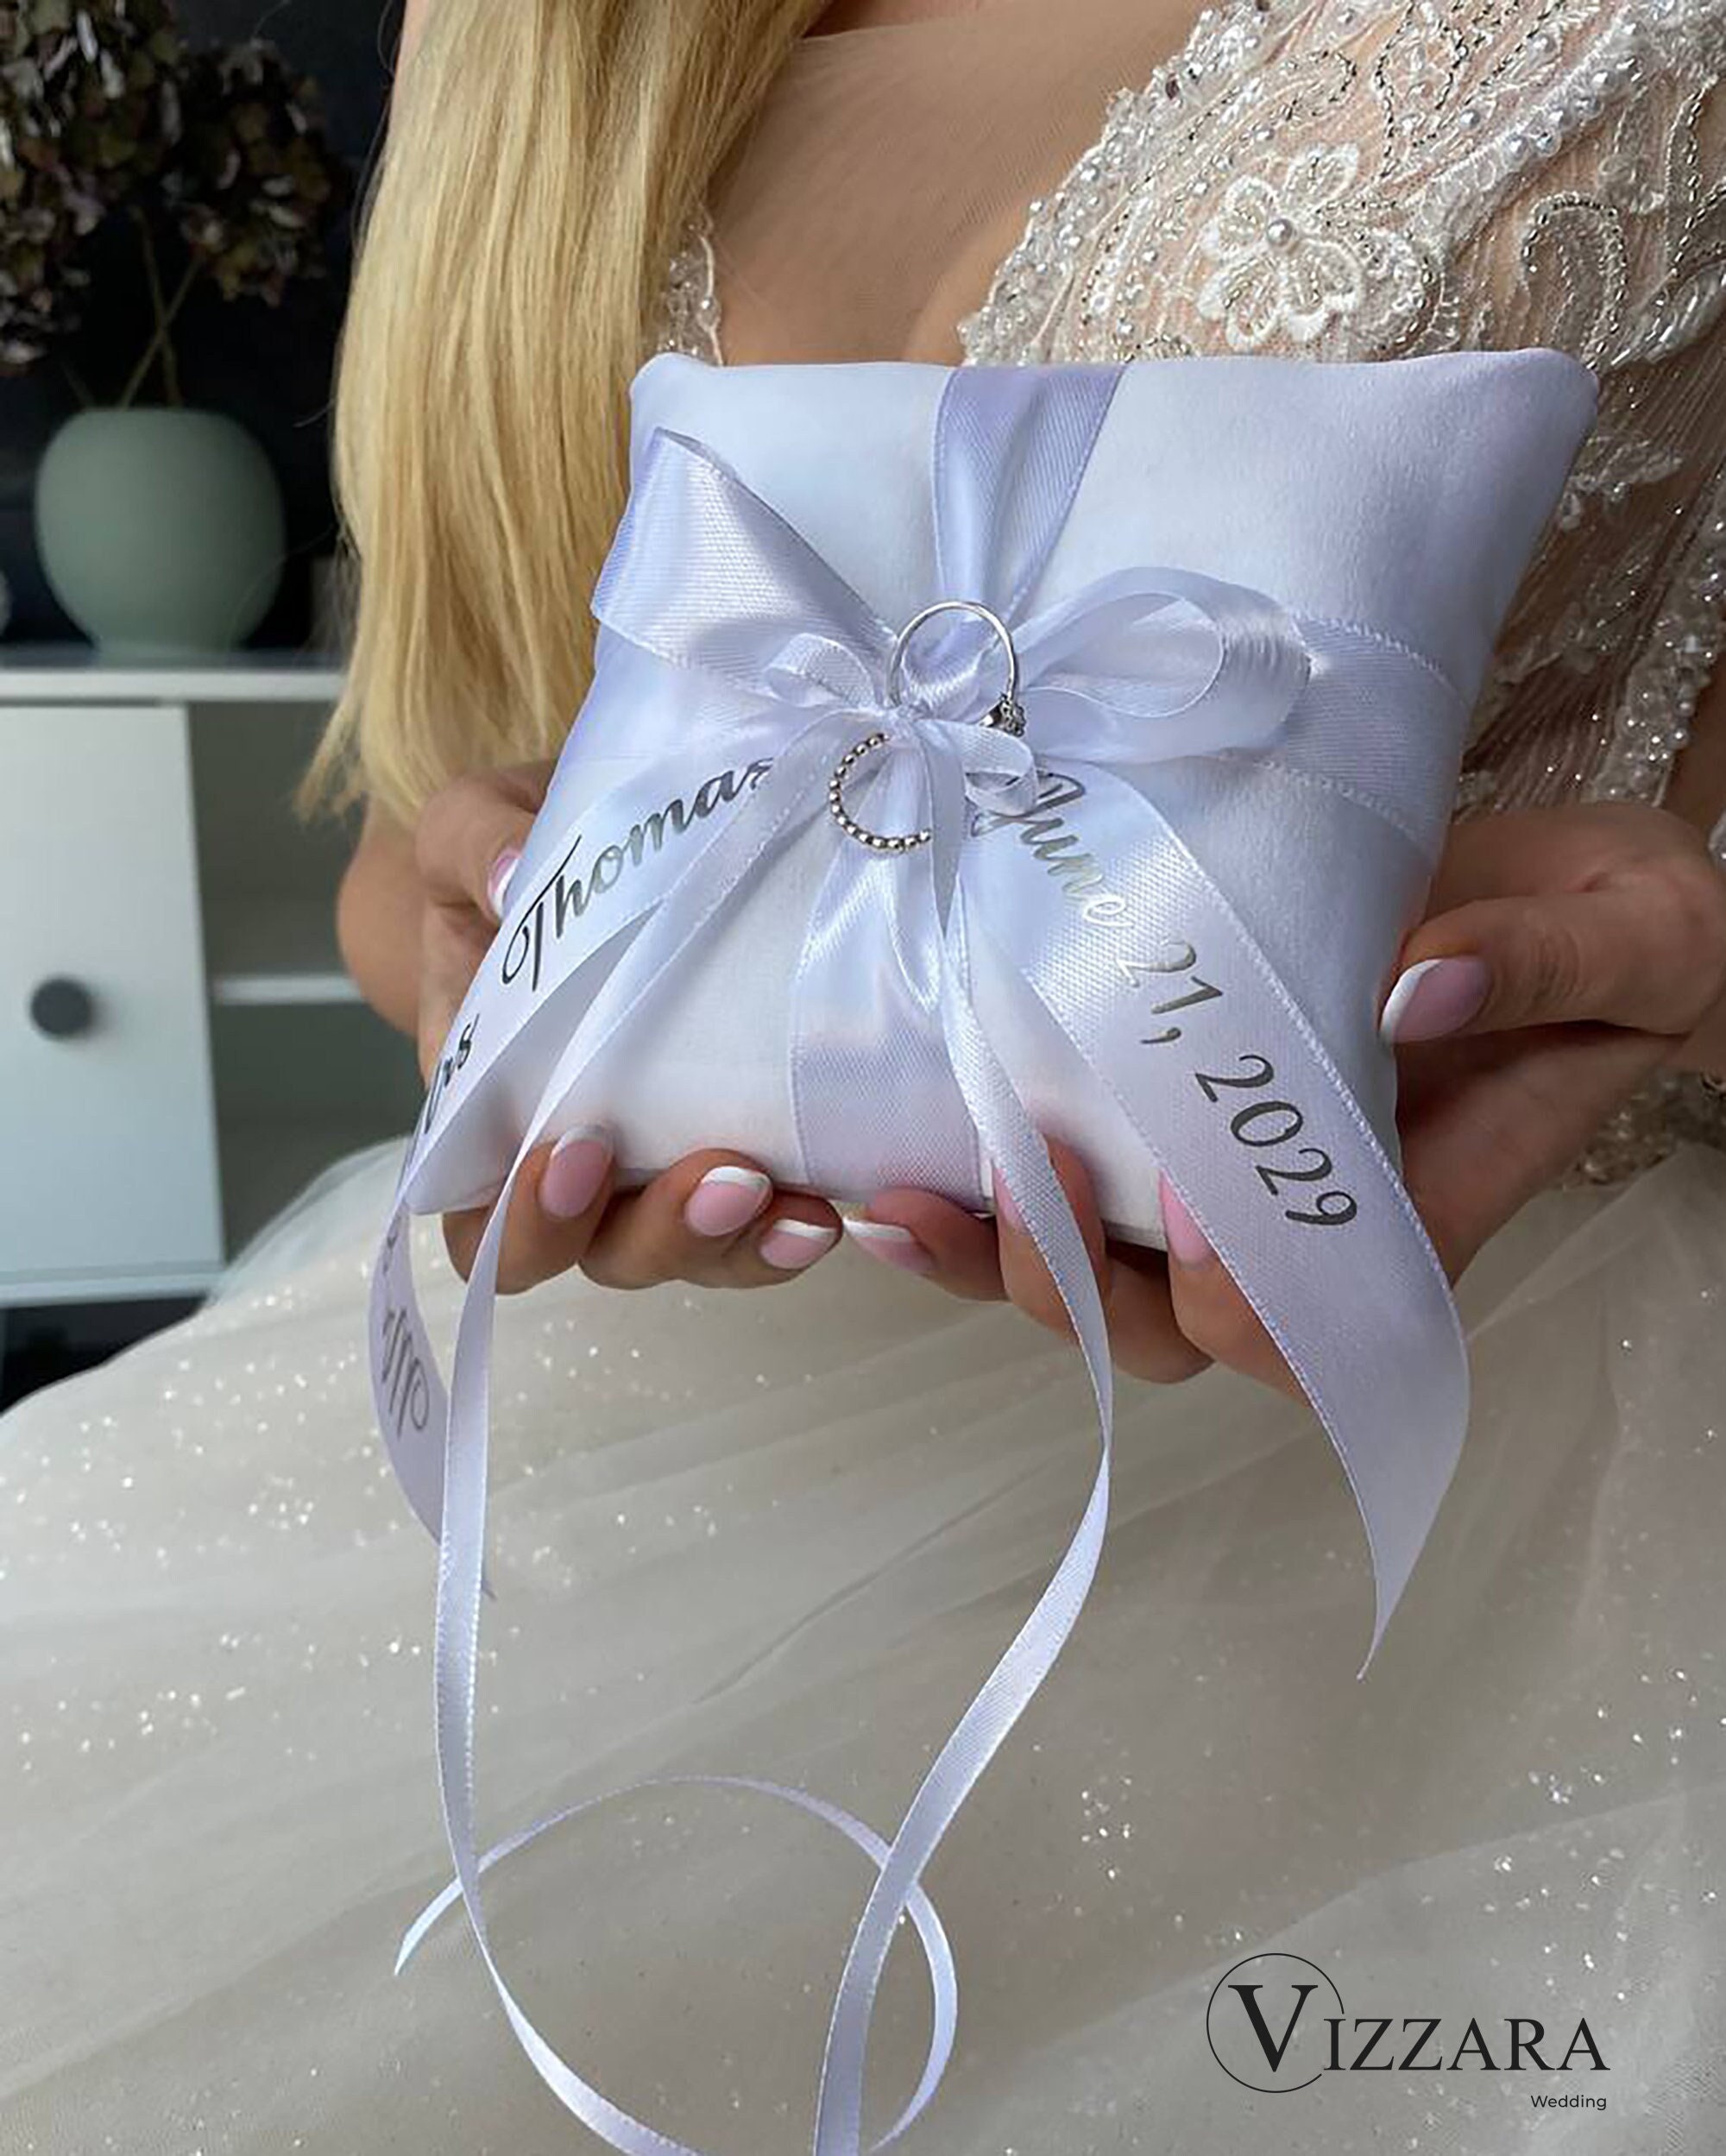 Customize your Wedding with Ring Pillow | Event Accomplished